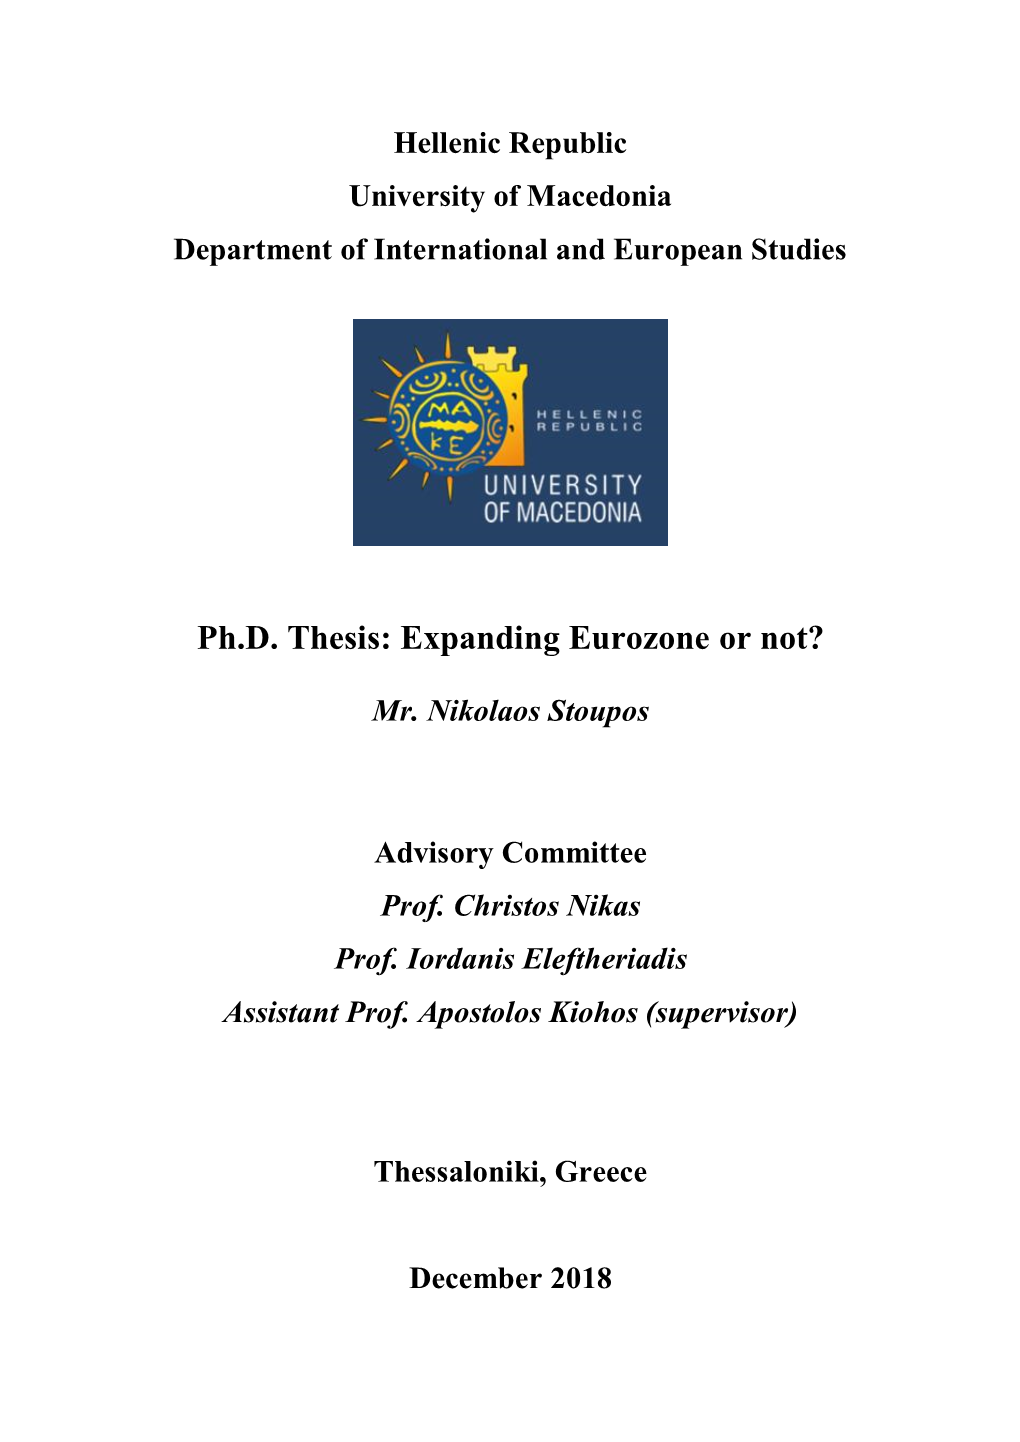 Ph.D. Thesis: Expanding Eurozone Or Not?